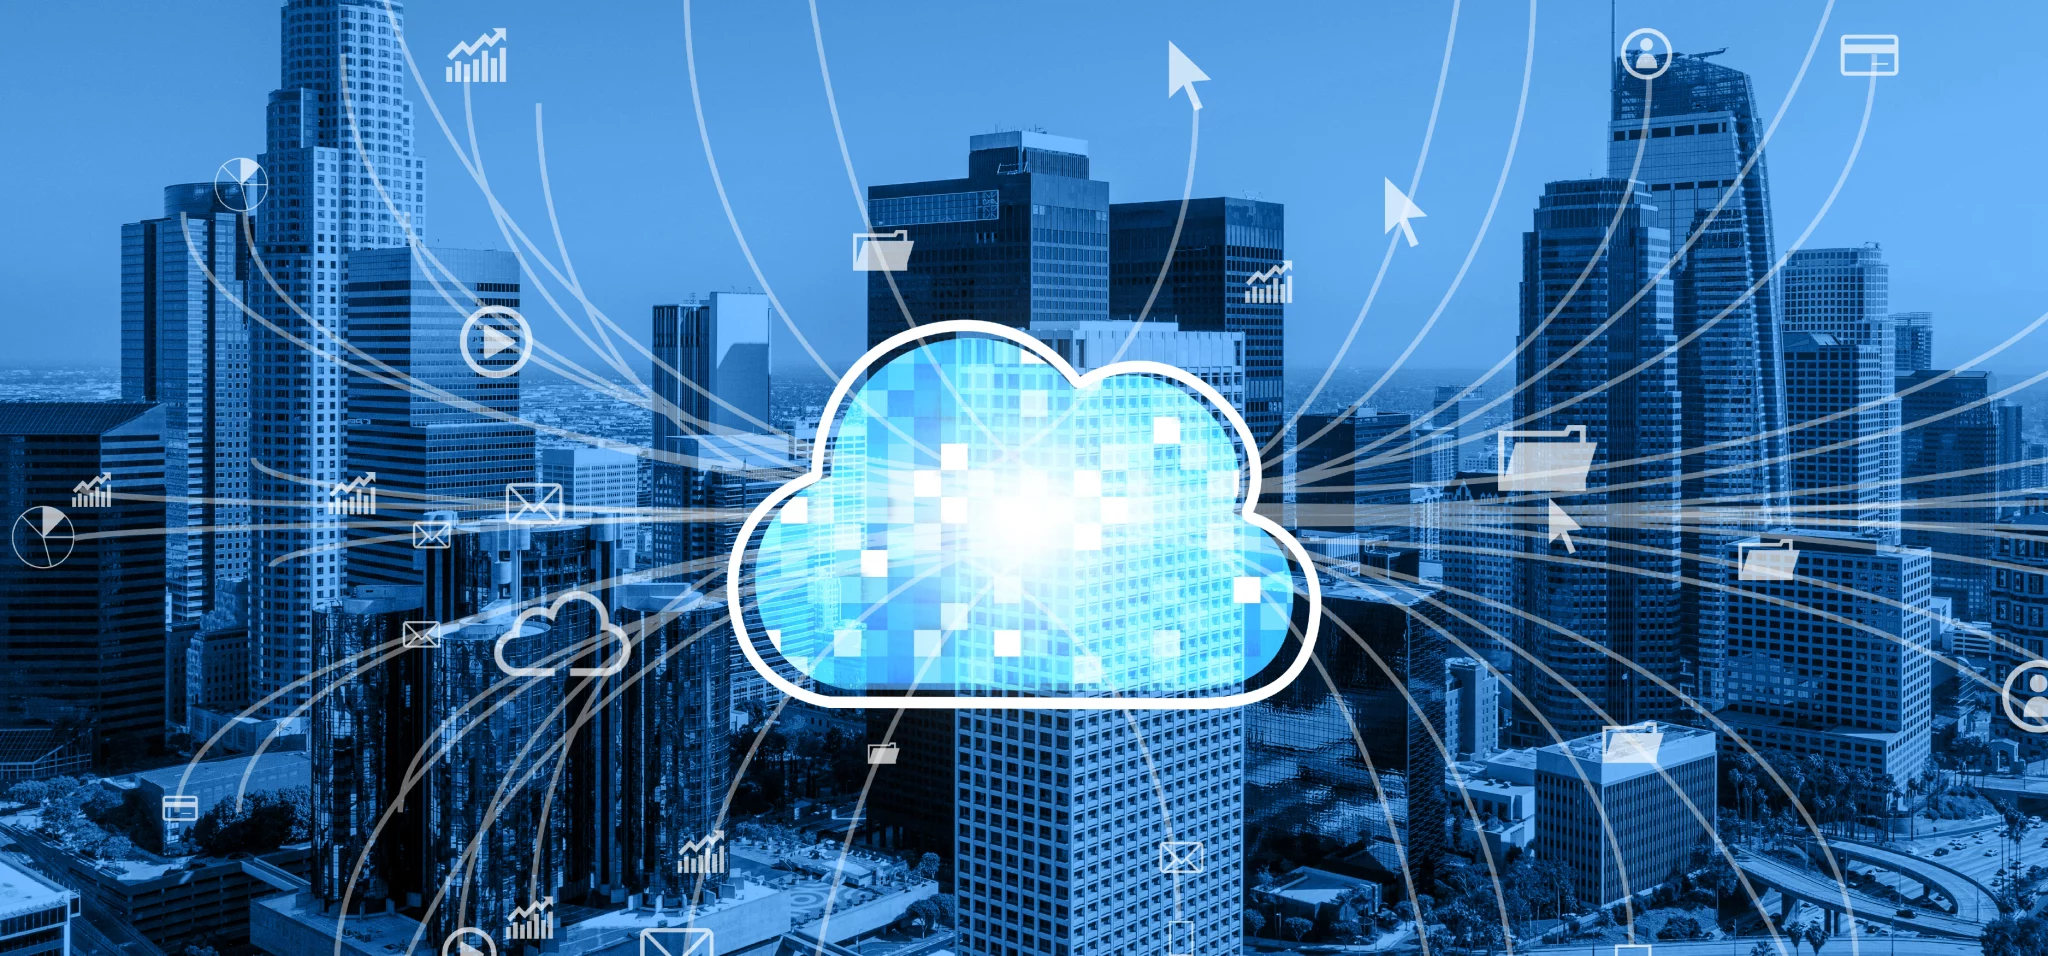 Managed Cloud Services in China: Advantages and Opportunities